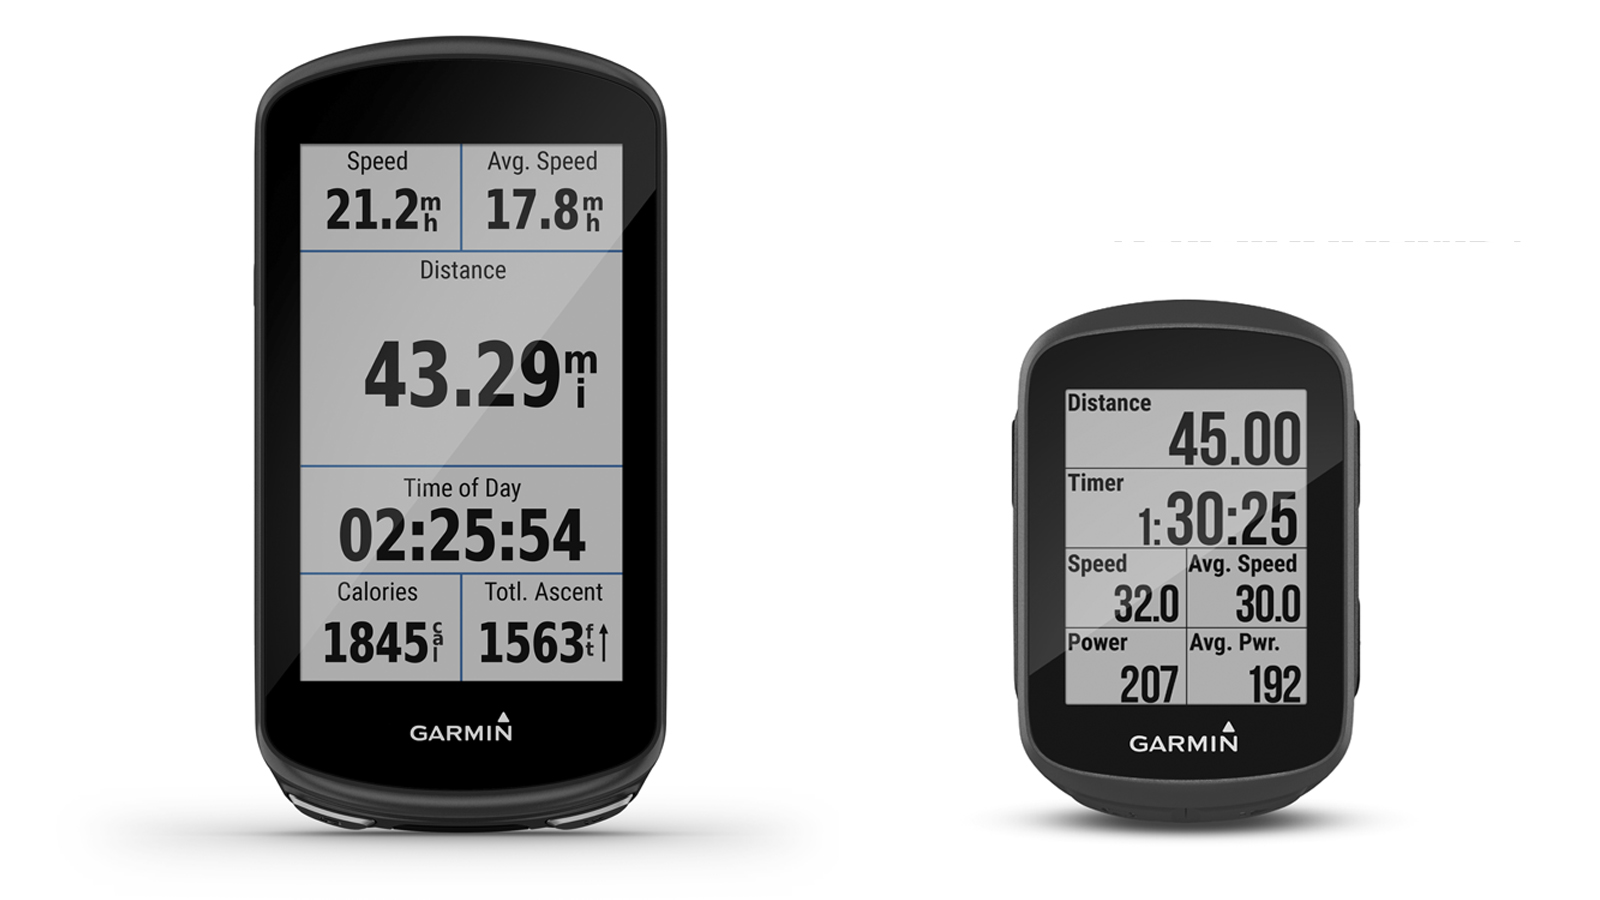 Garmin releases the new Edge 130 Plus and Edge 1030 Plus | Cyclingnews